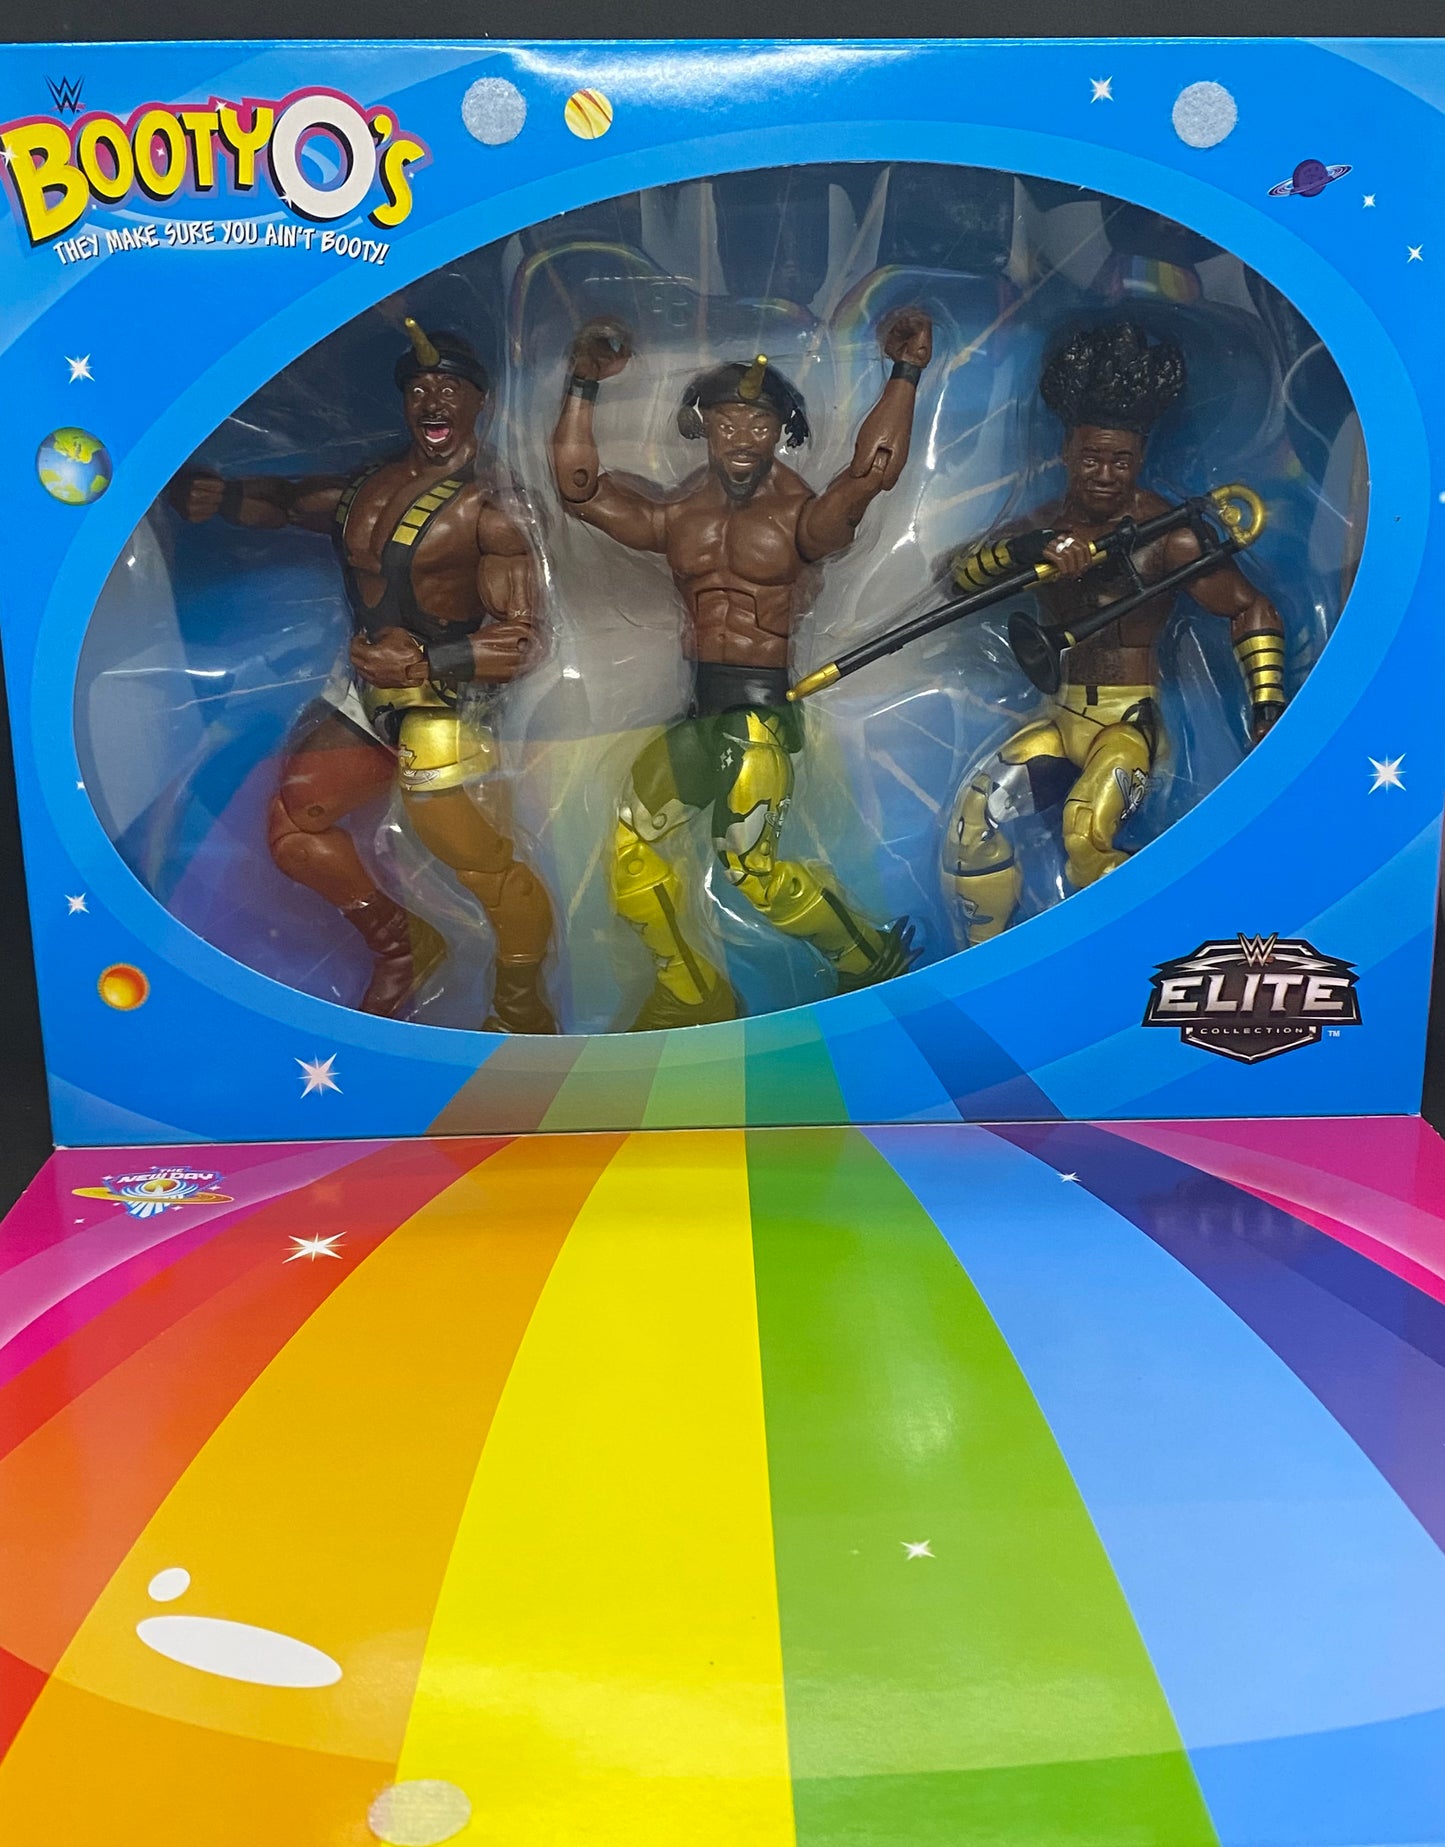 Mattel WWE Elite Booty O’s cereal box display with The New Day